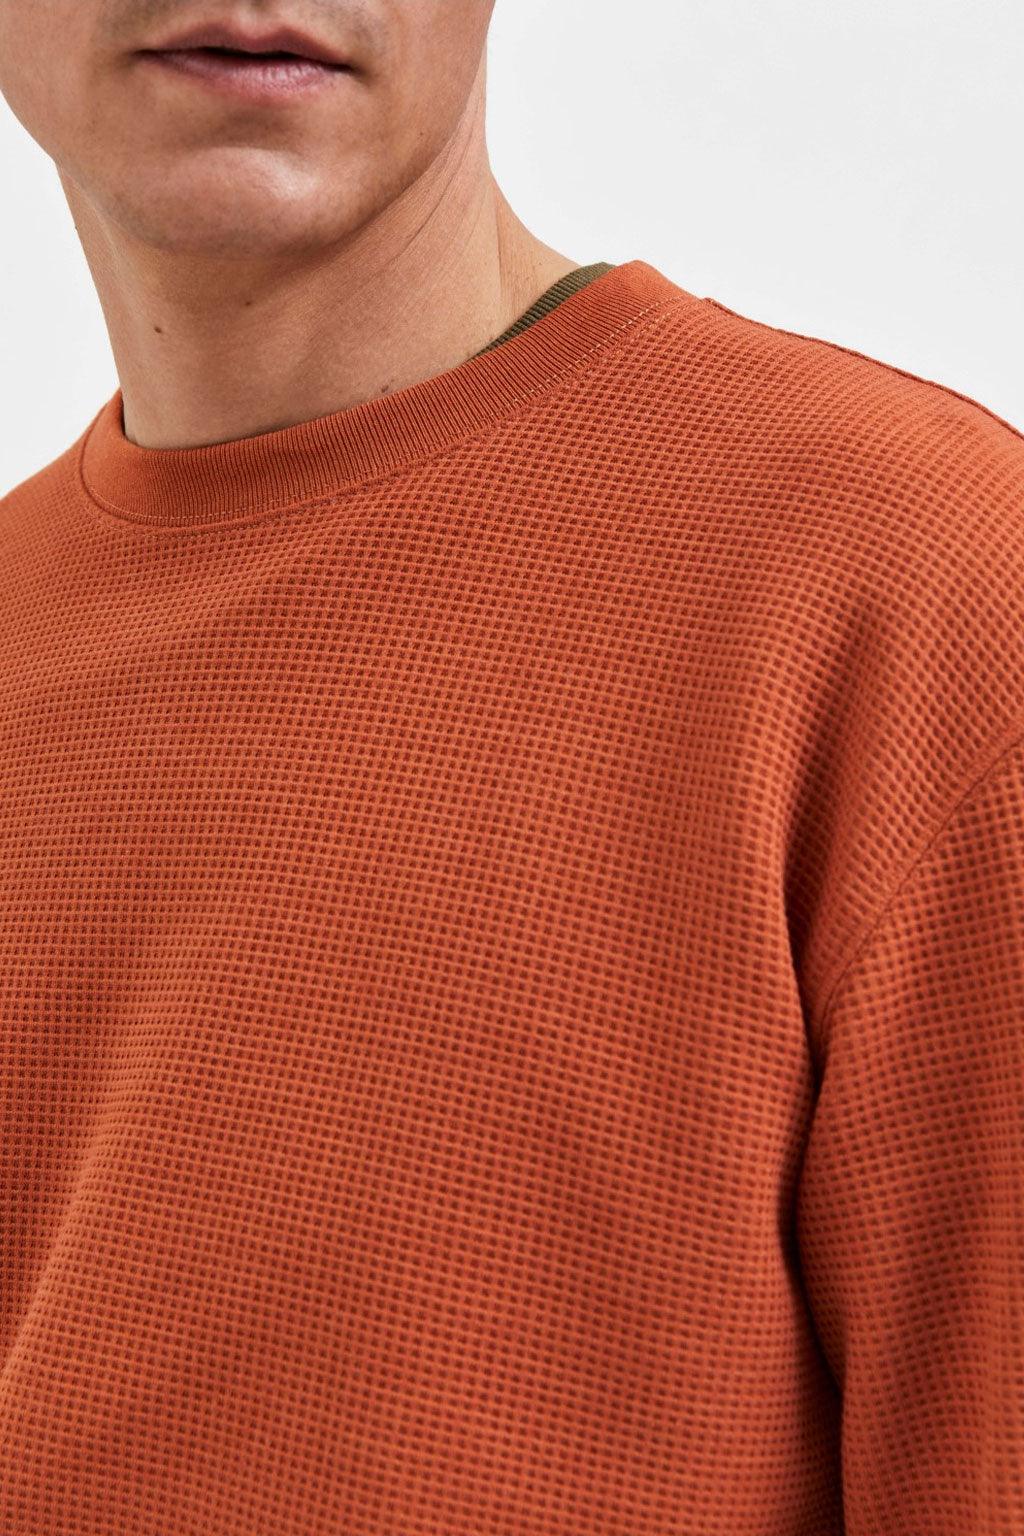 Selected sweater | Big Boss | the menswear concept